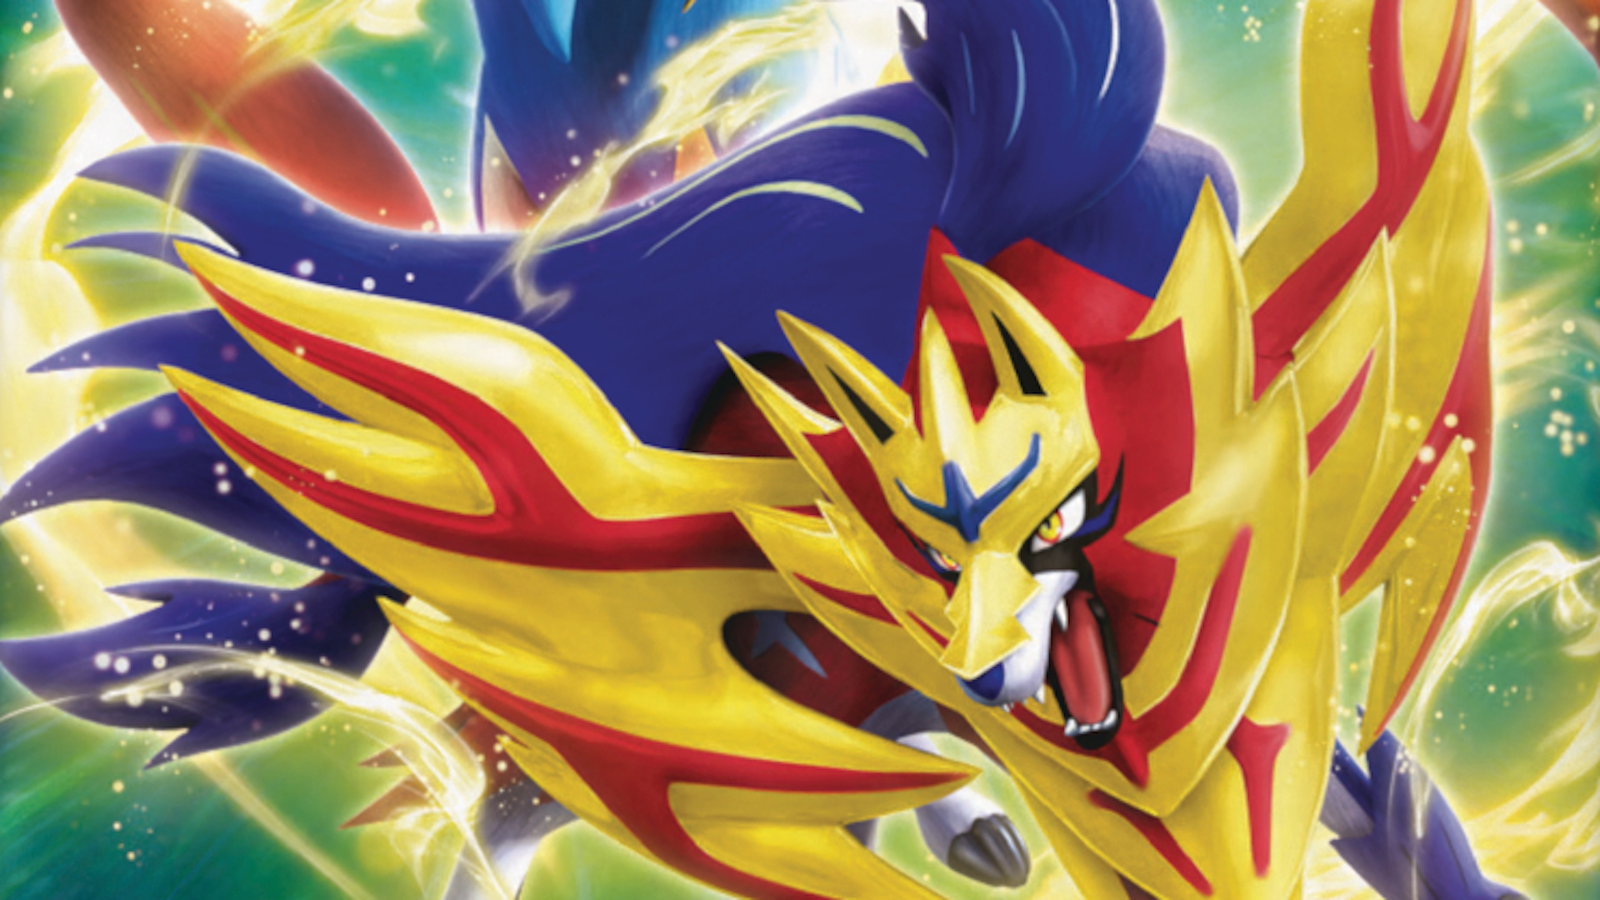 Check Out Our Pulls From This Shiny Zamazenta V Collection Box! 